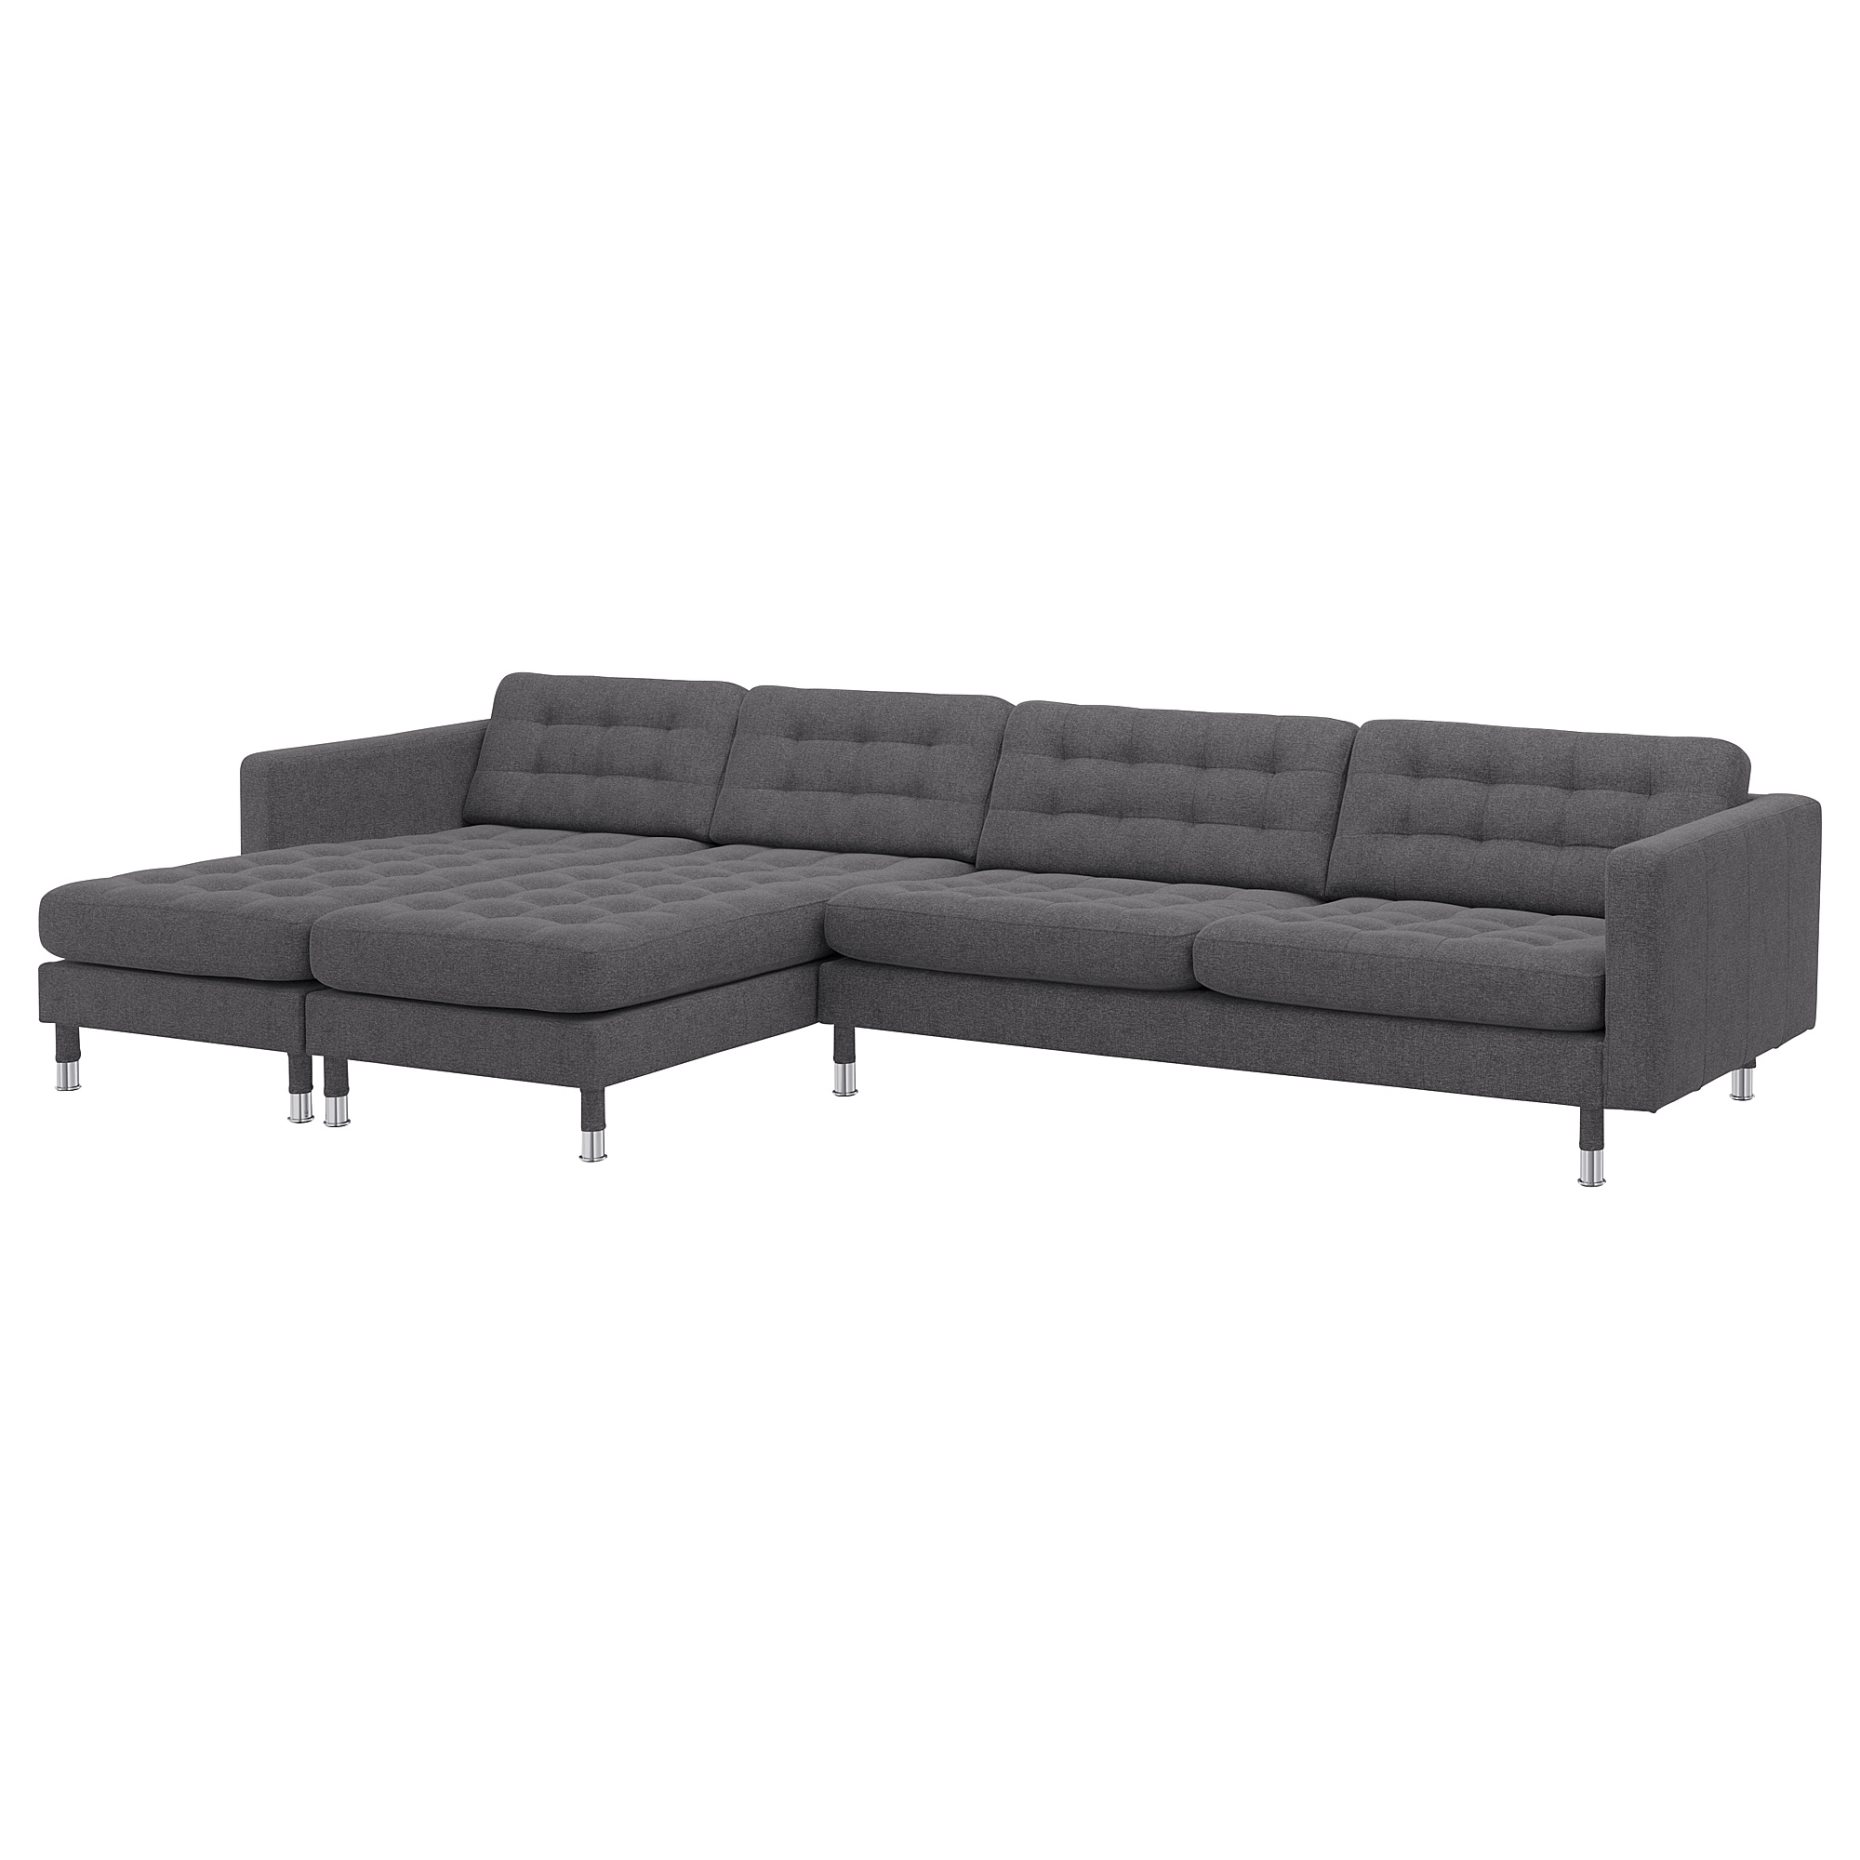 LANDSKRONA, 5-seat sofa with chaise longues, 692.699.82